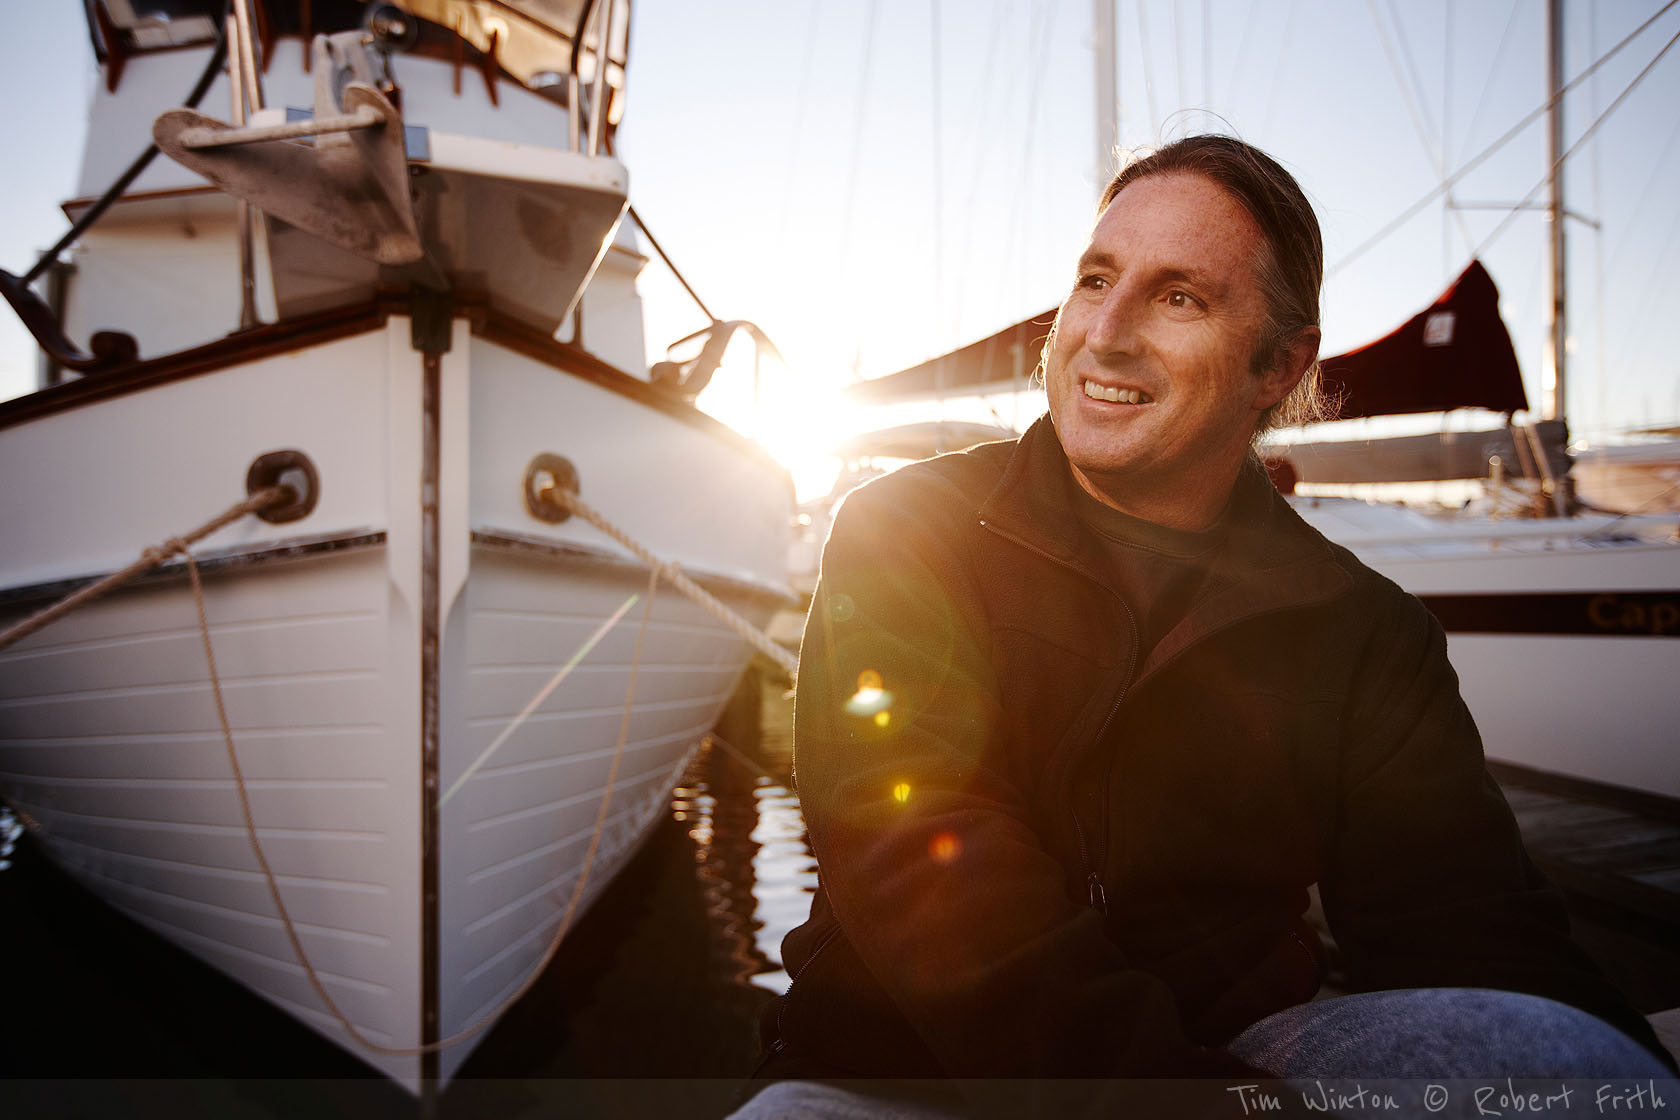 Tim Winton photographed at Fremantle Sailing Club for his first play "Rising Water"